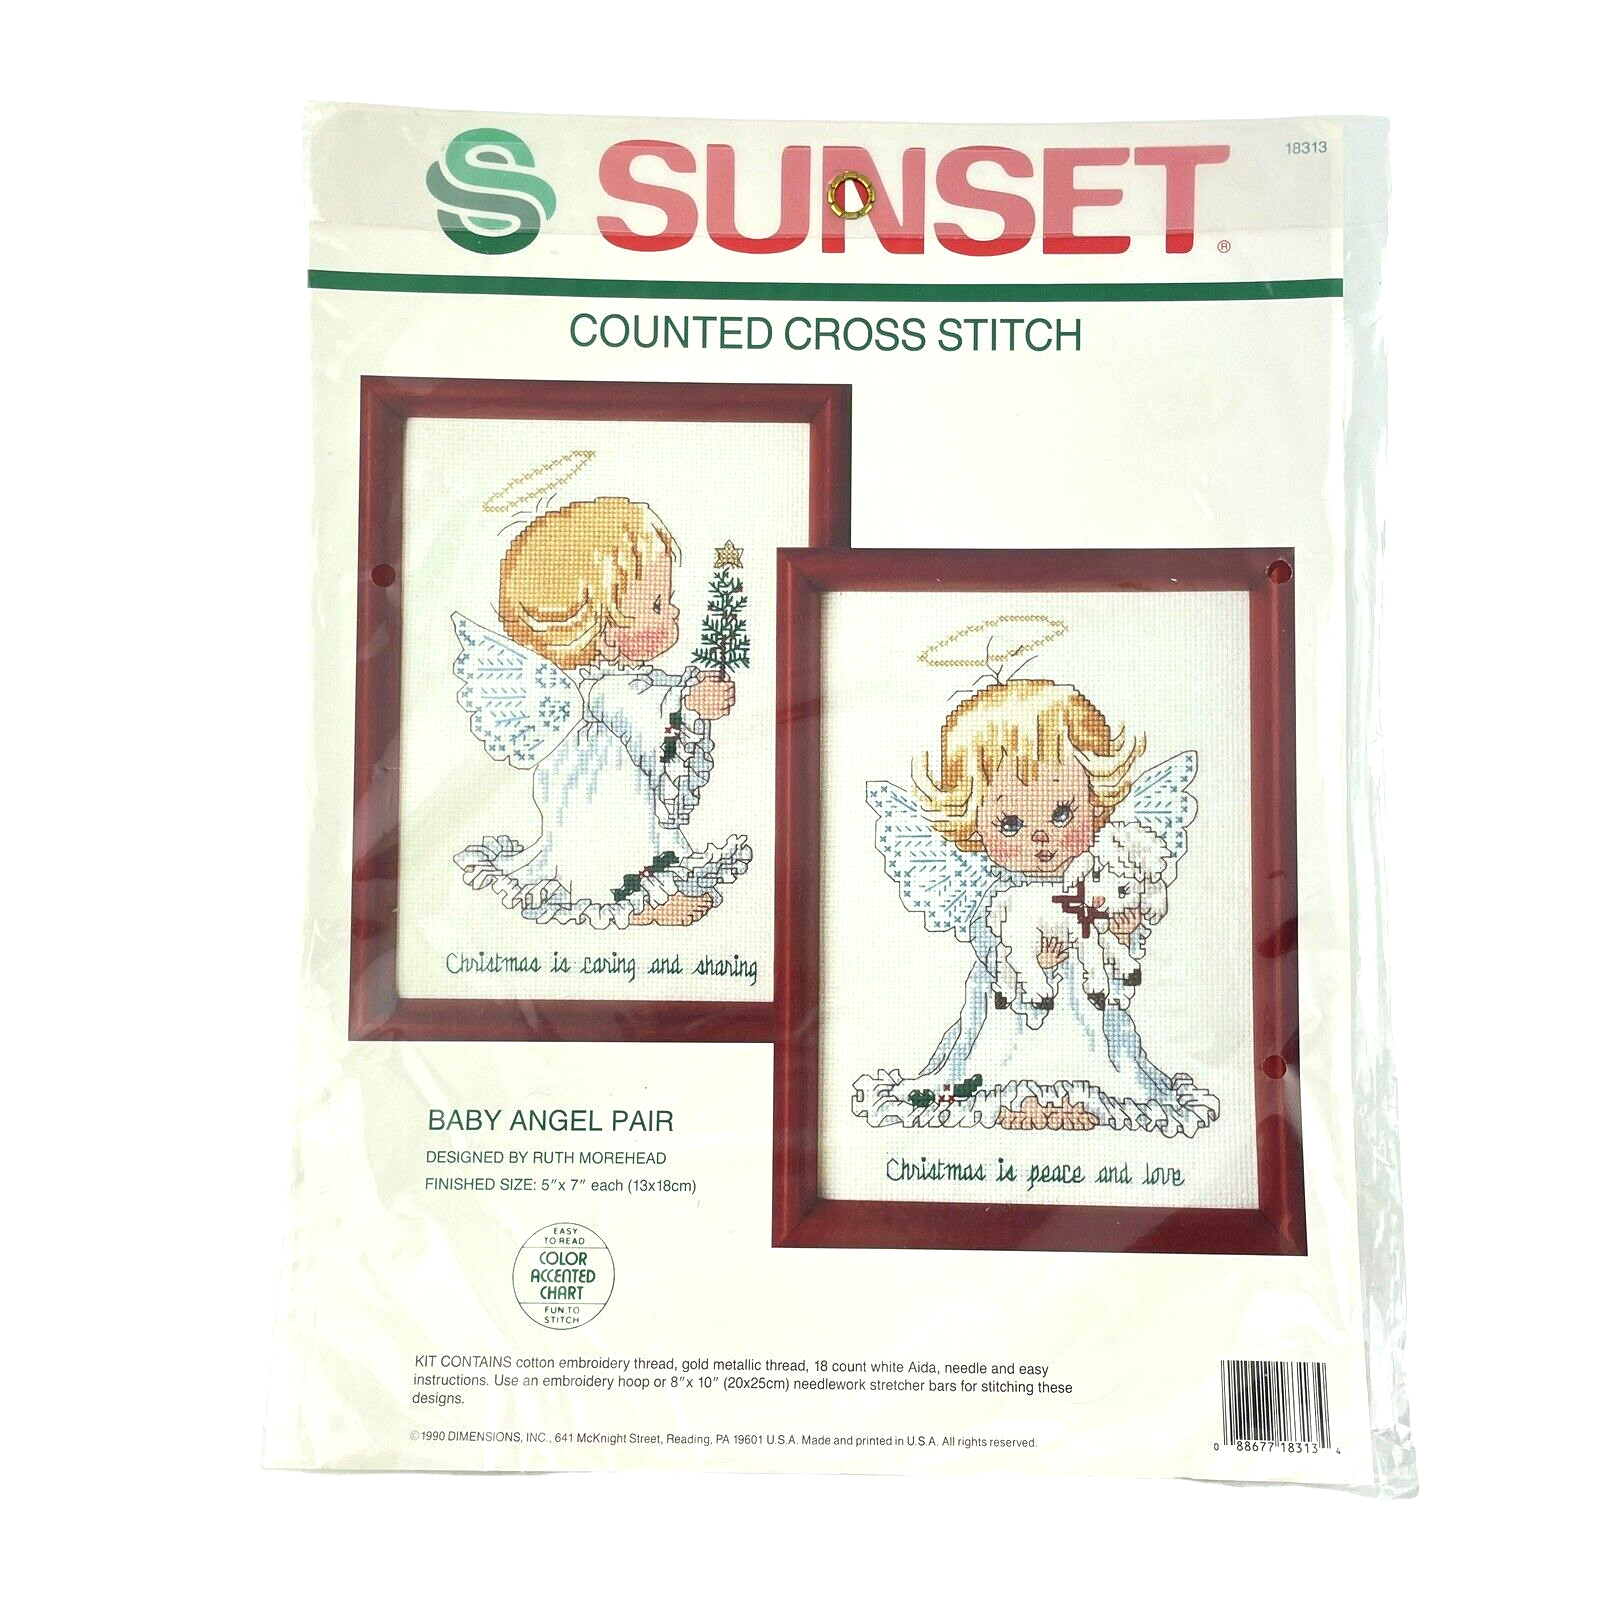 Sunset Counted Cross Stitch Christmas Baby Angel Pair by Ruth Morehead 1990 - $23.62